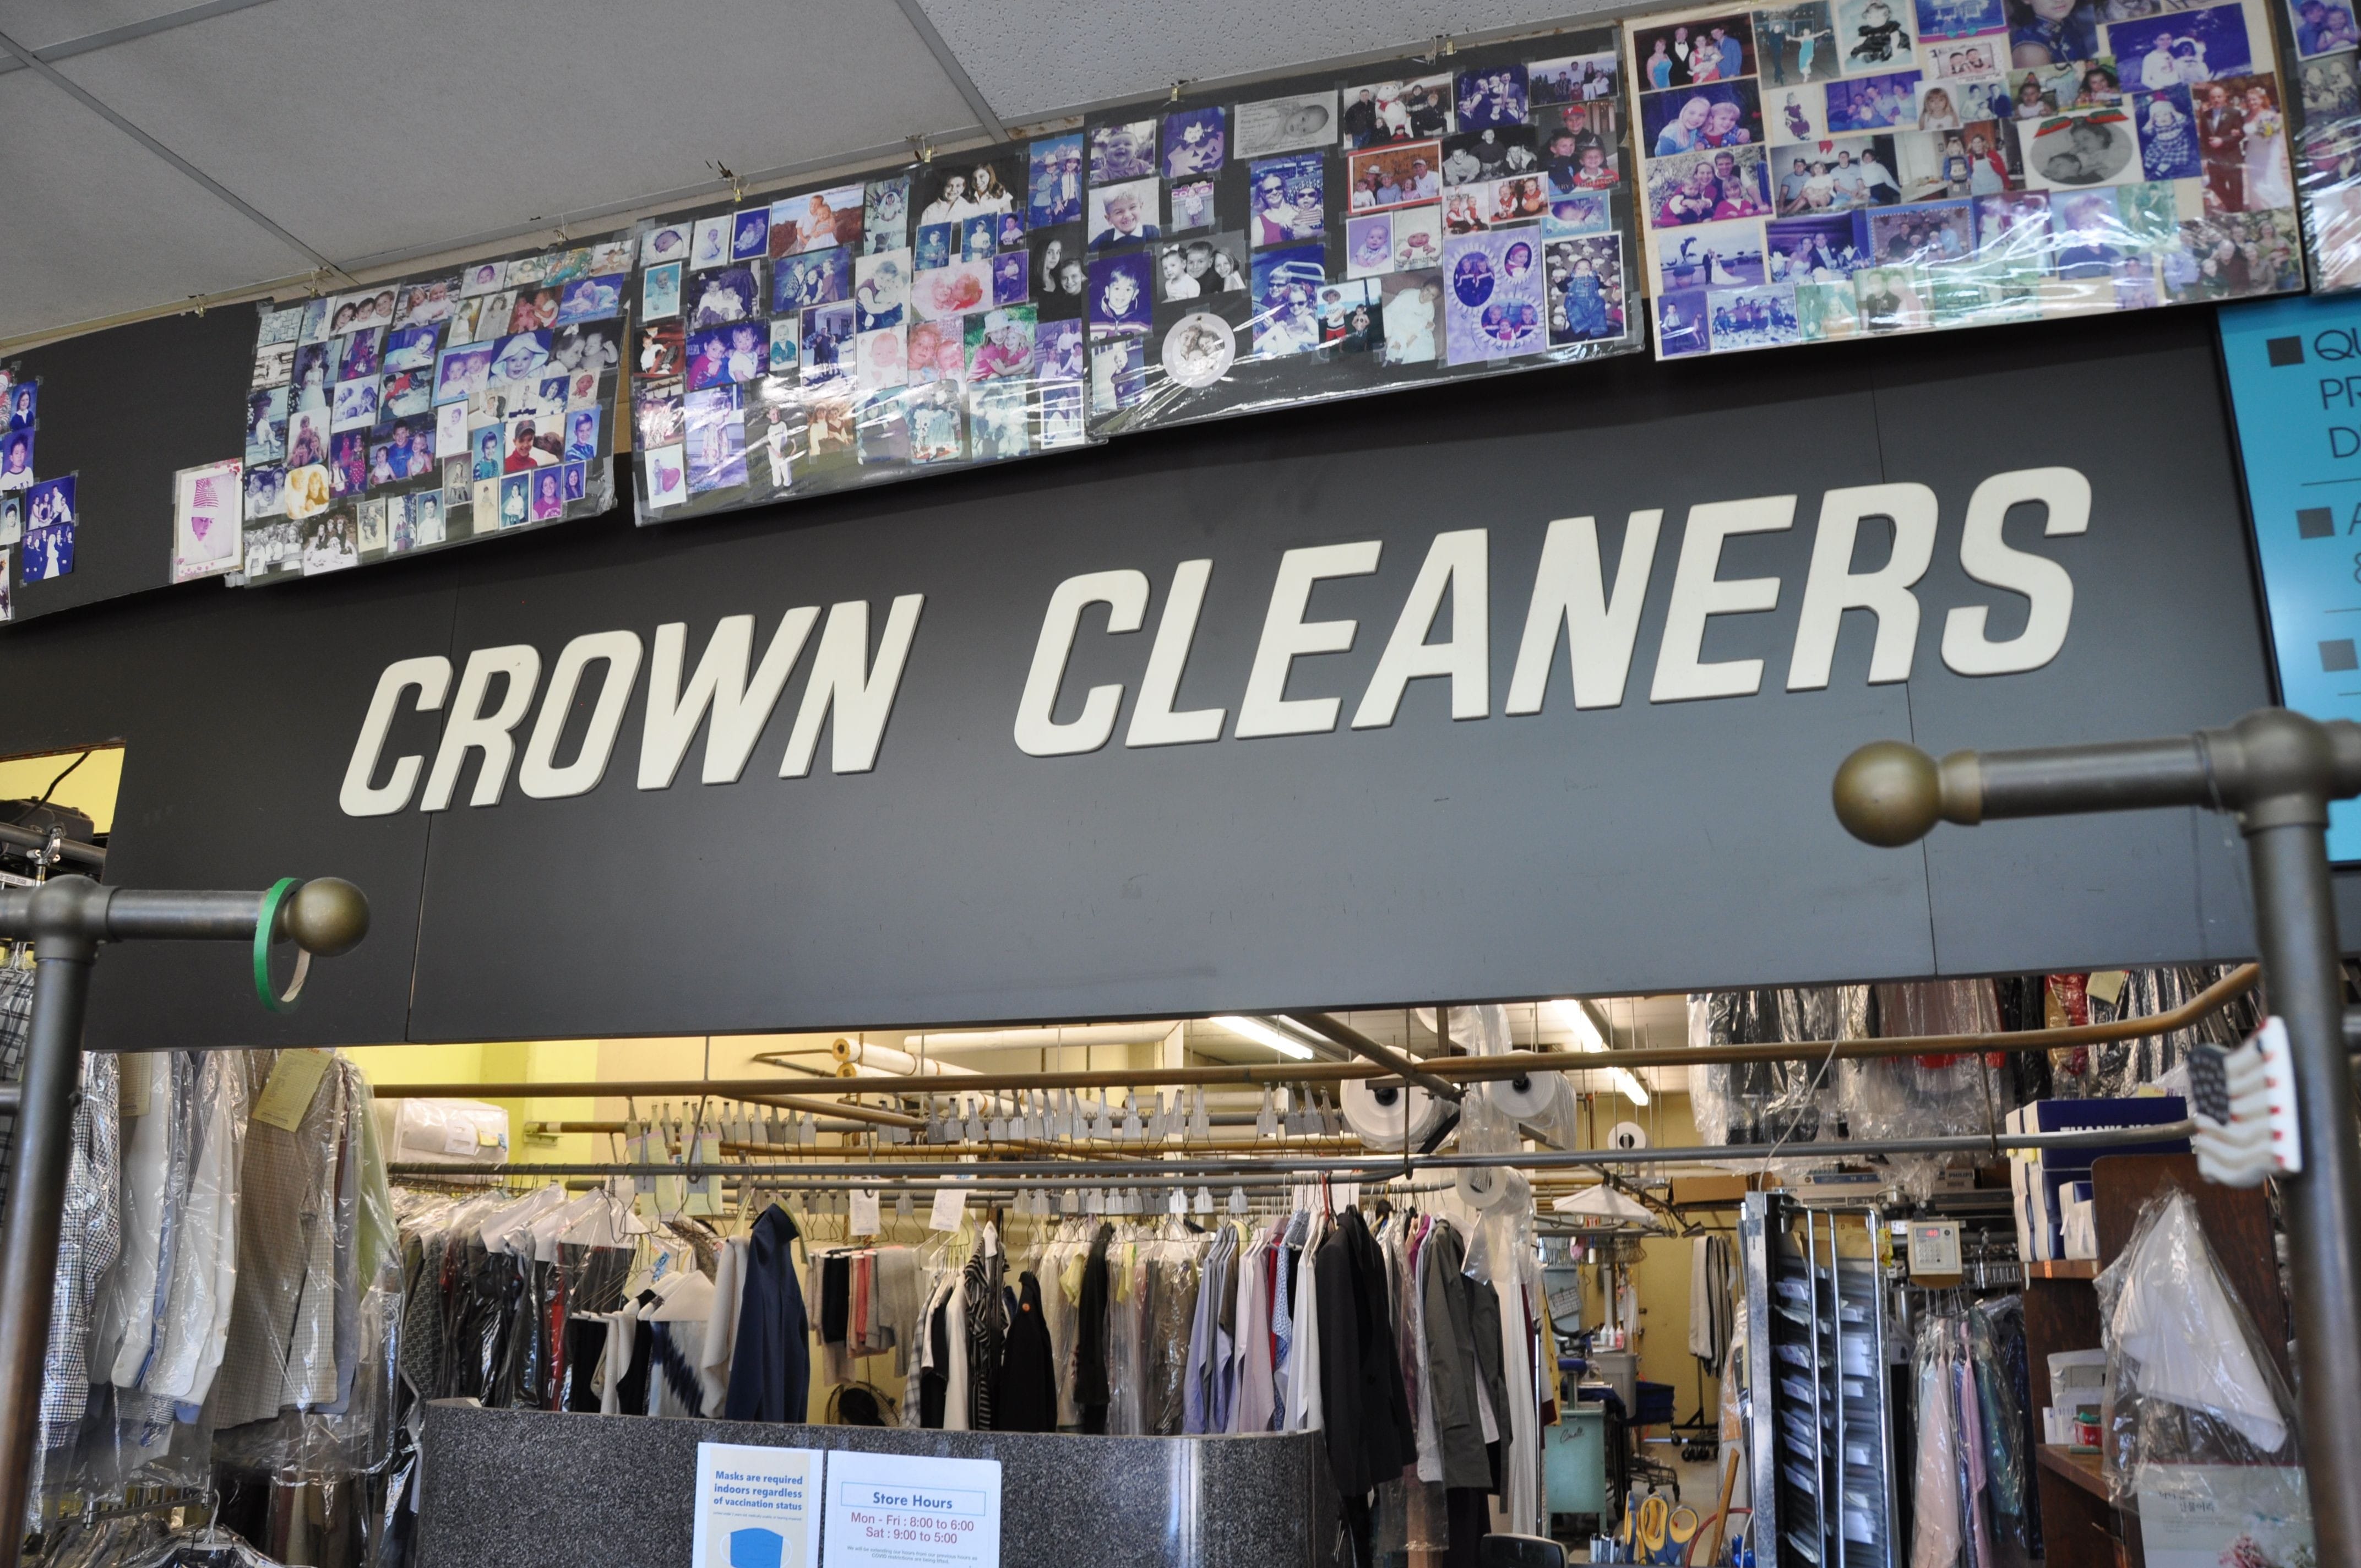 A photo showing the interior sign at Crown Cleaners.